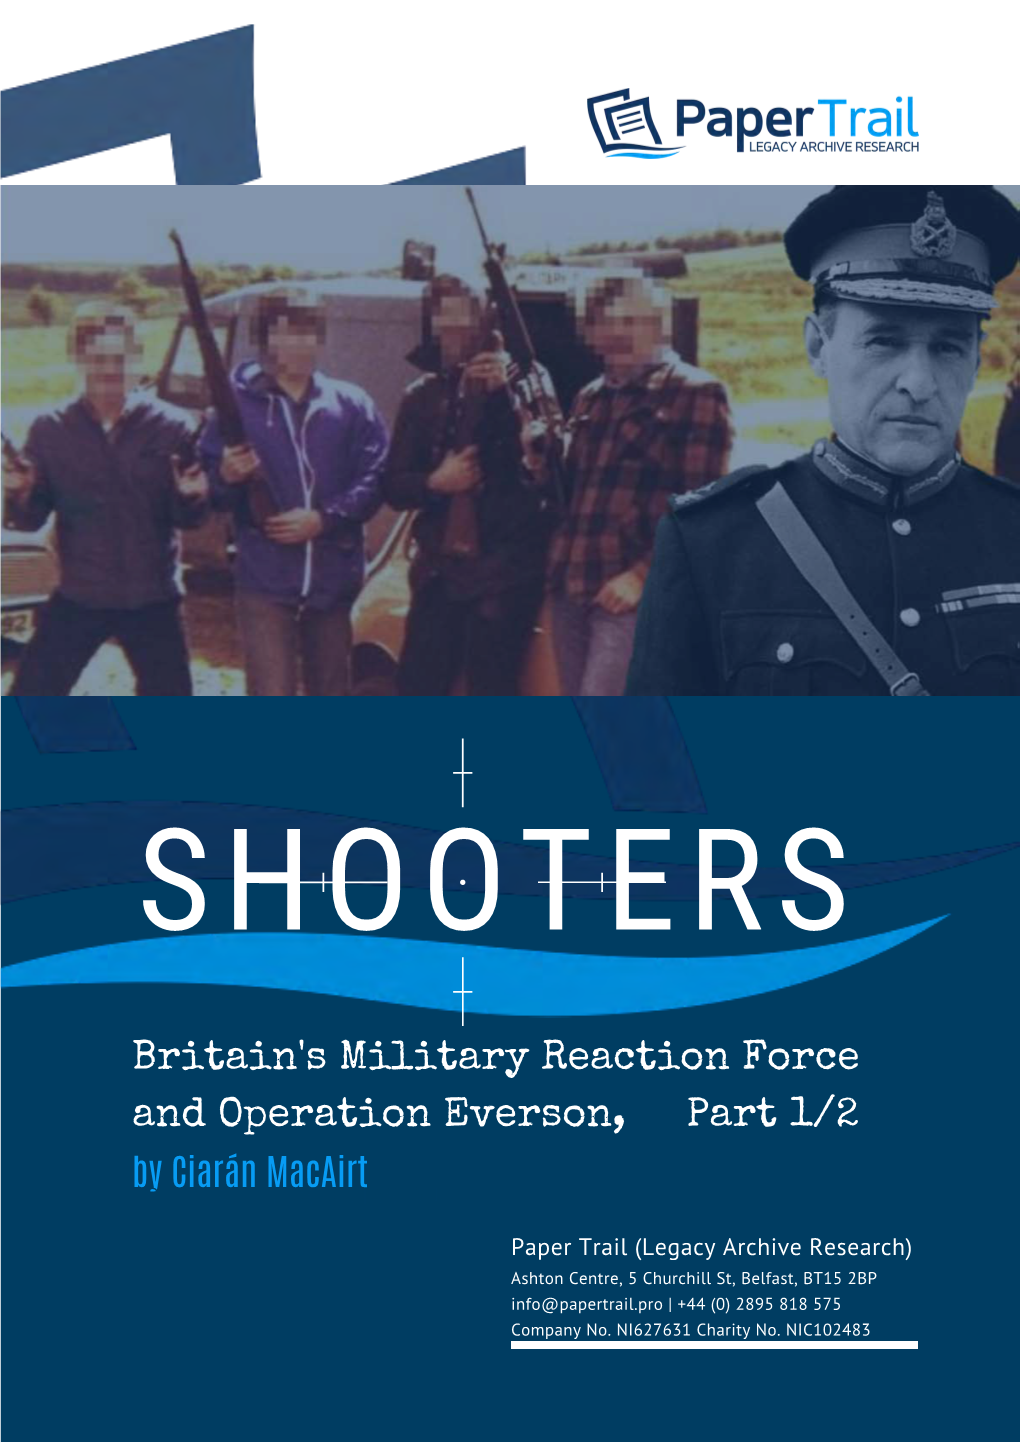 SHOOTERS: Britain's Military Reaction Force